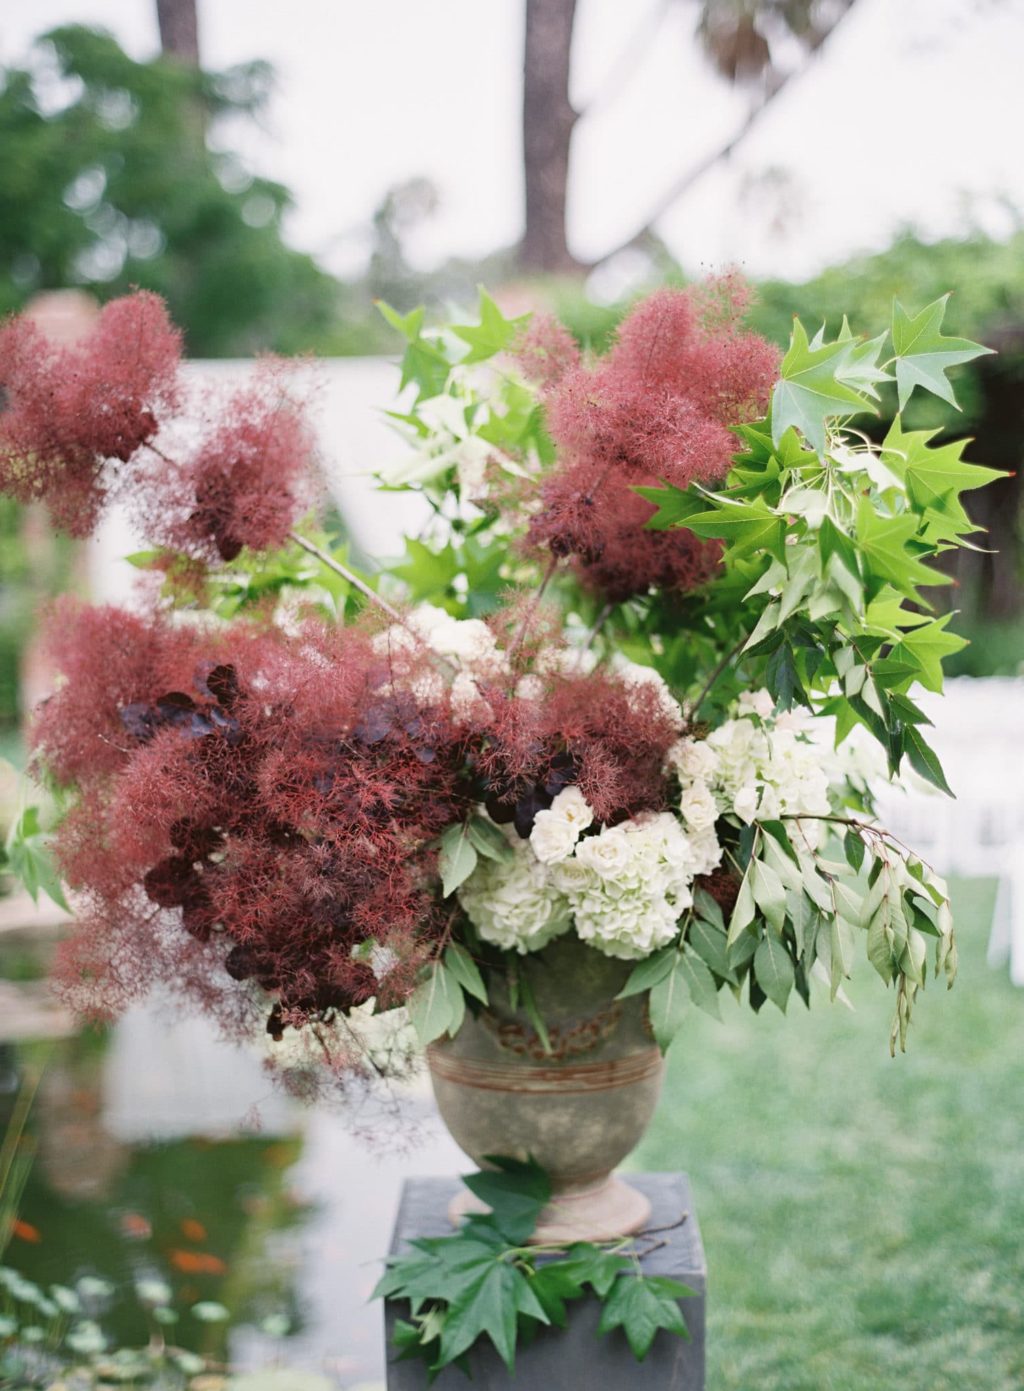 A beautiful wedding arrangement with burgundy smoke bush, dark leaves, greenery and white blooms looks refined